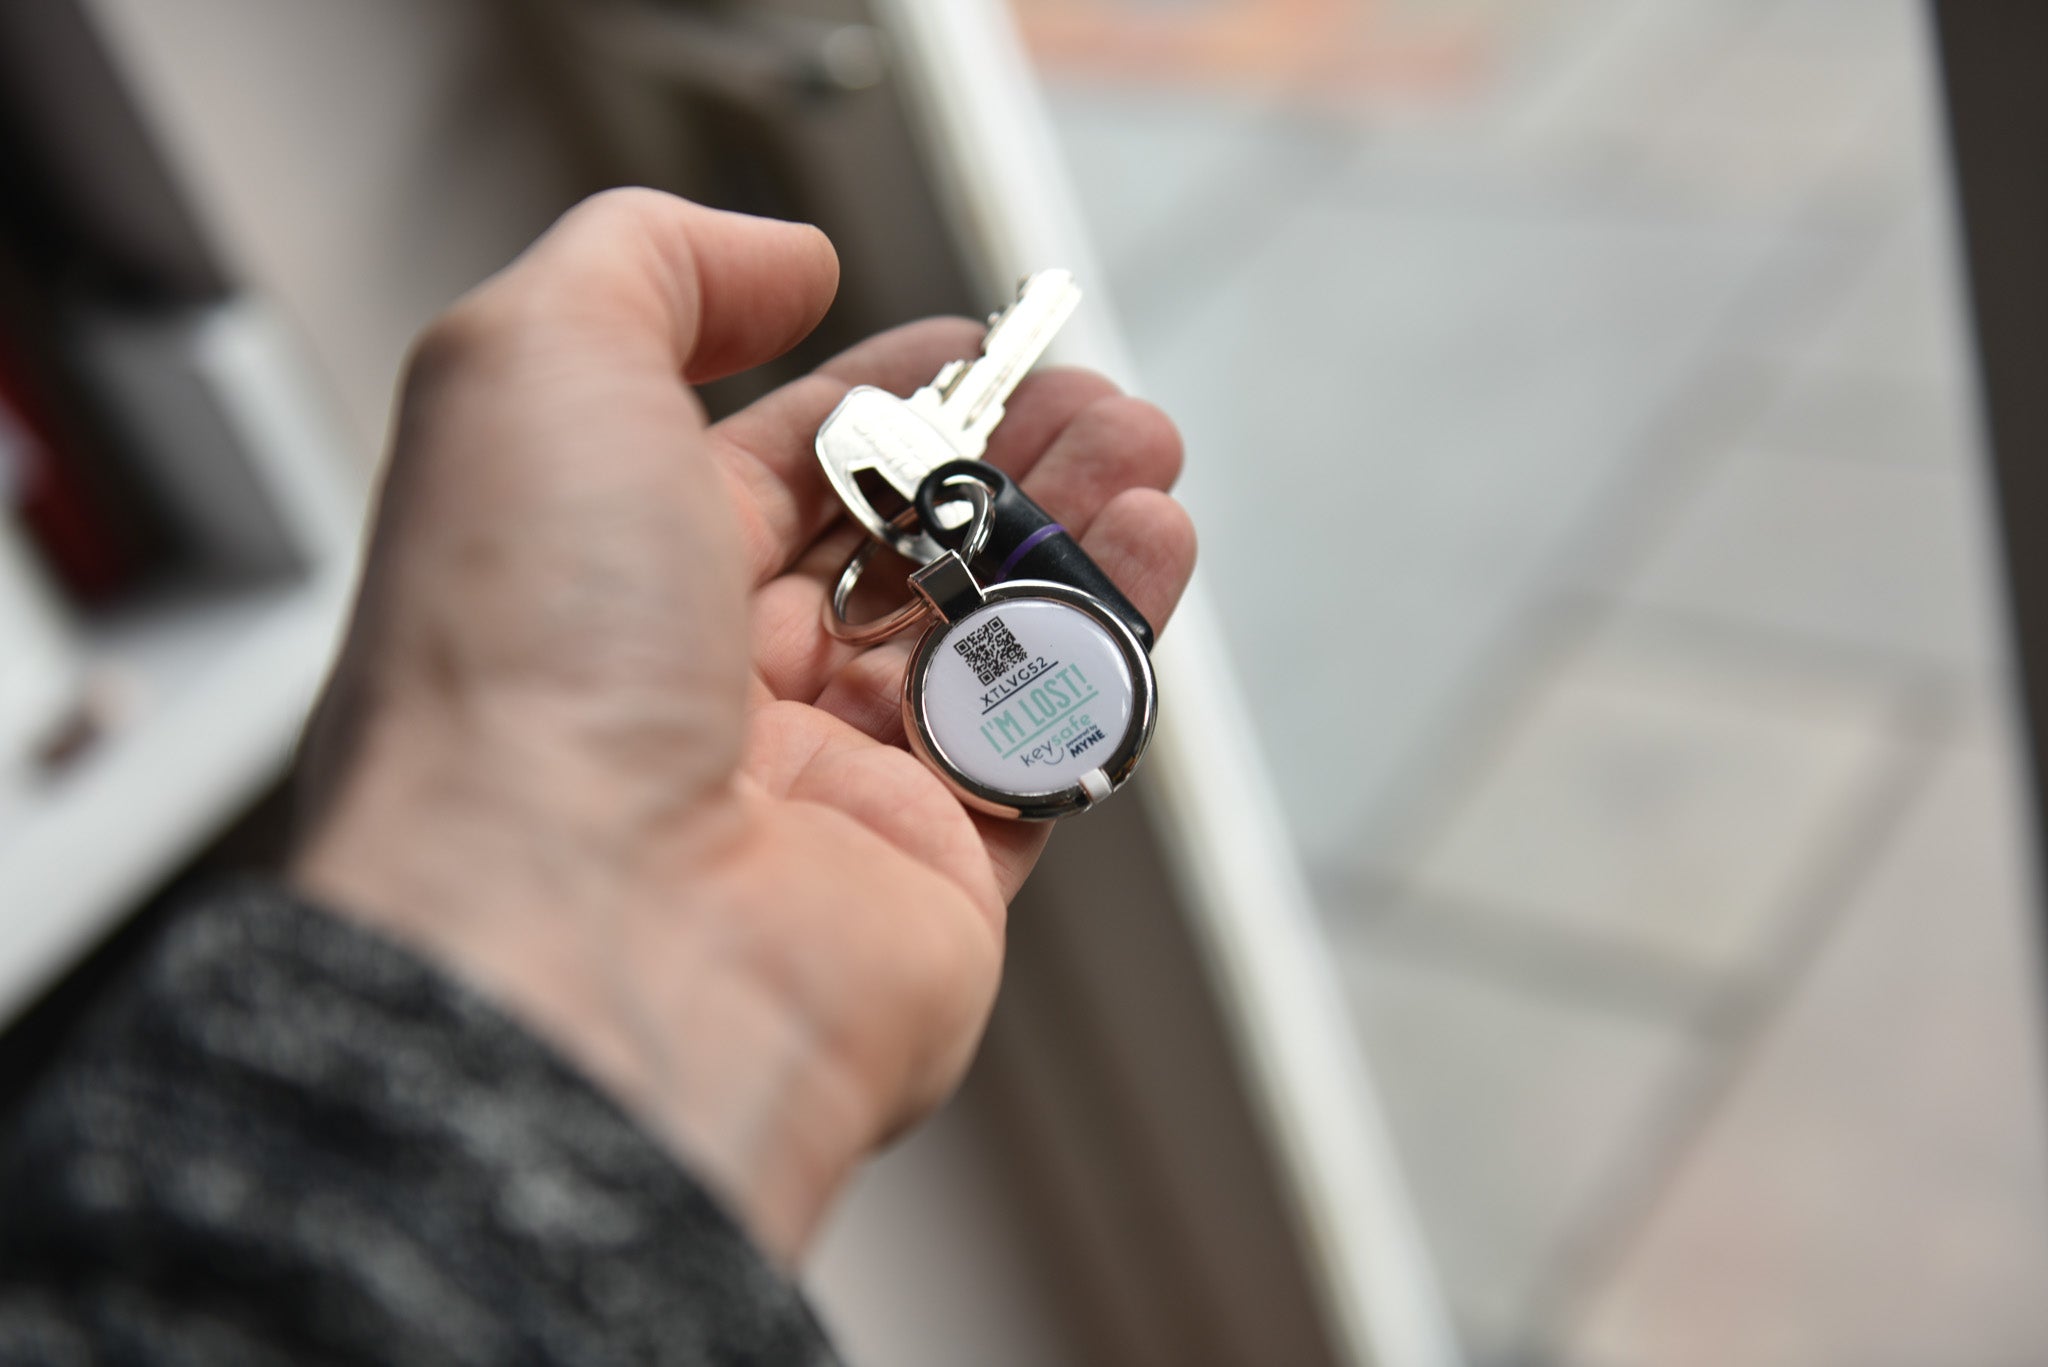 Digital keyring attached to key and fob in mans hand